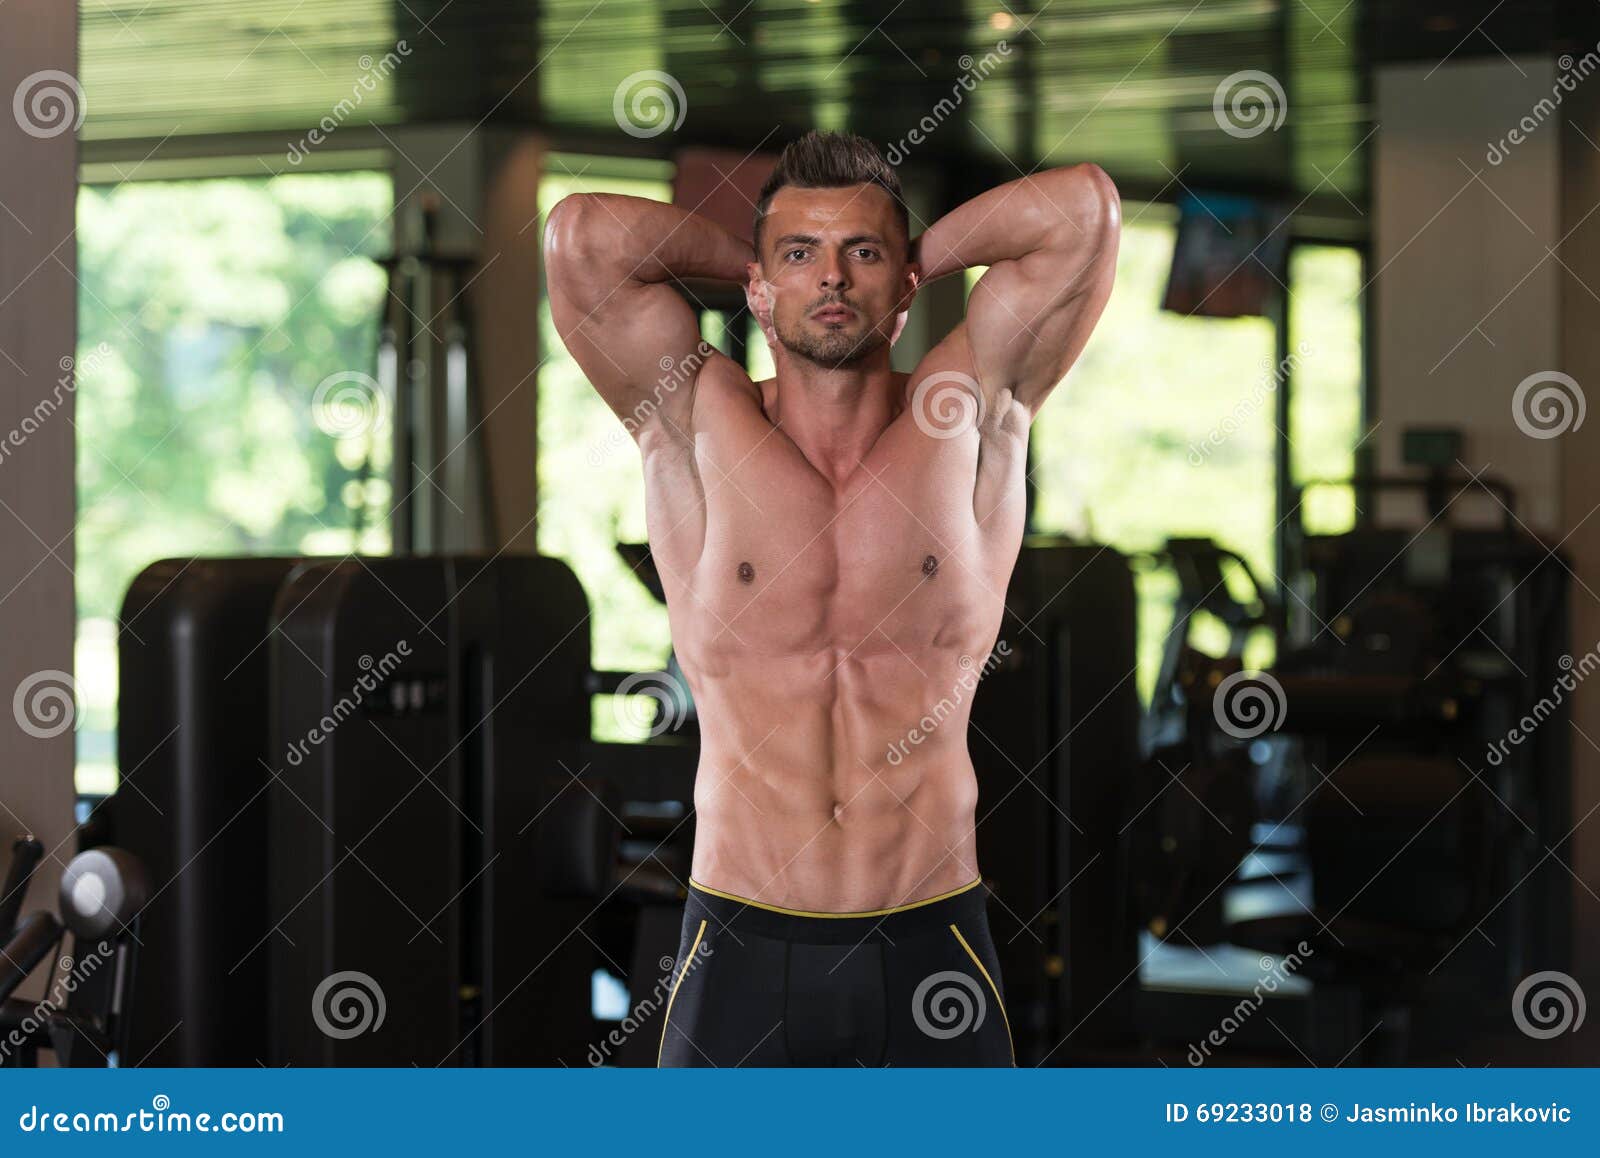 Toned and ripped lean muscle fitness man lifting weights 